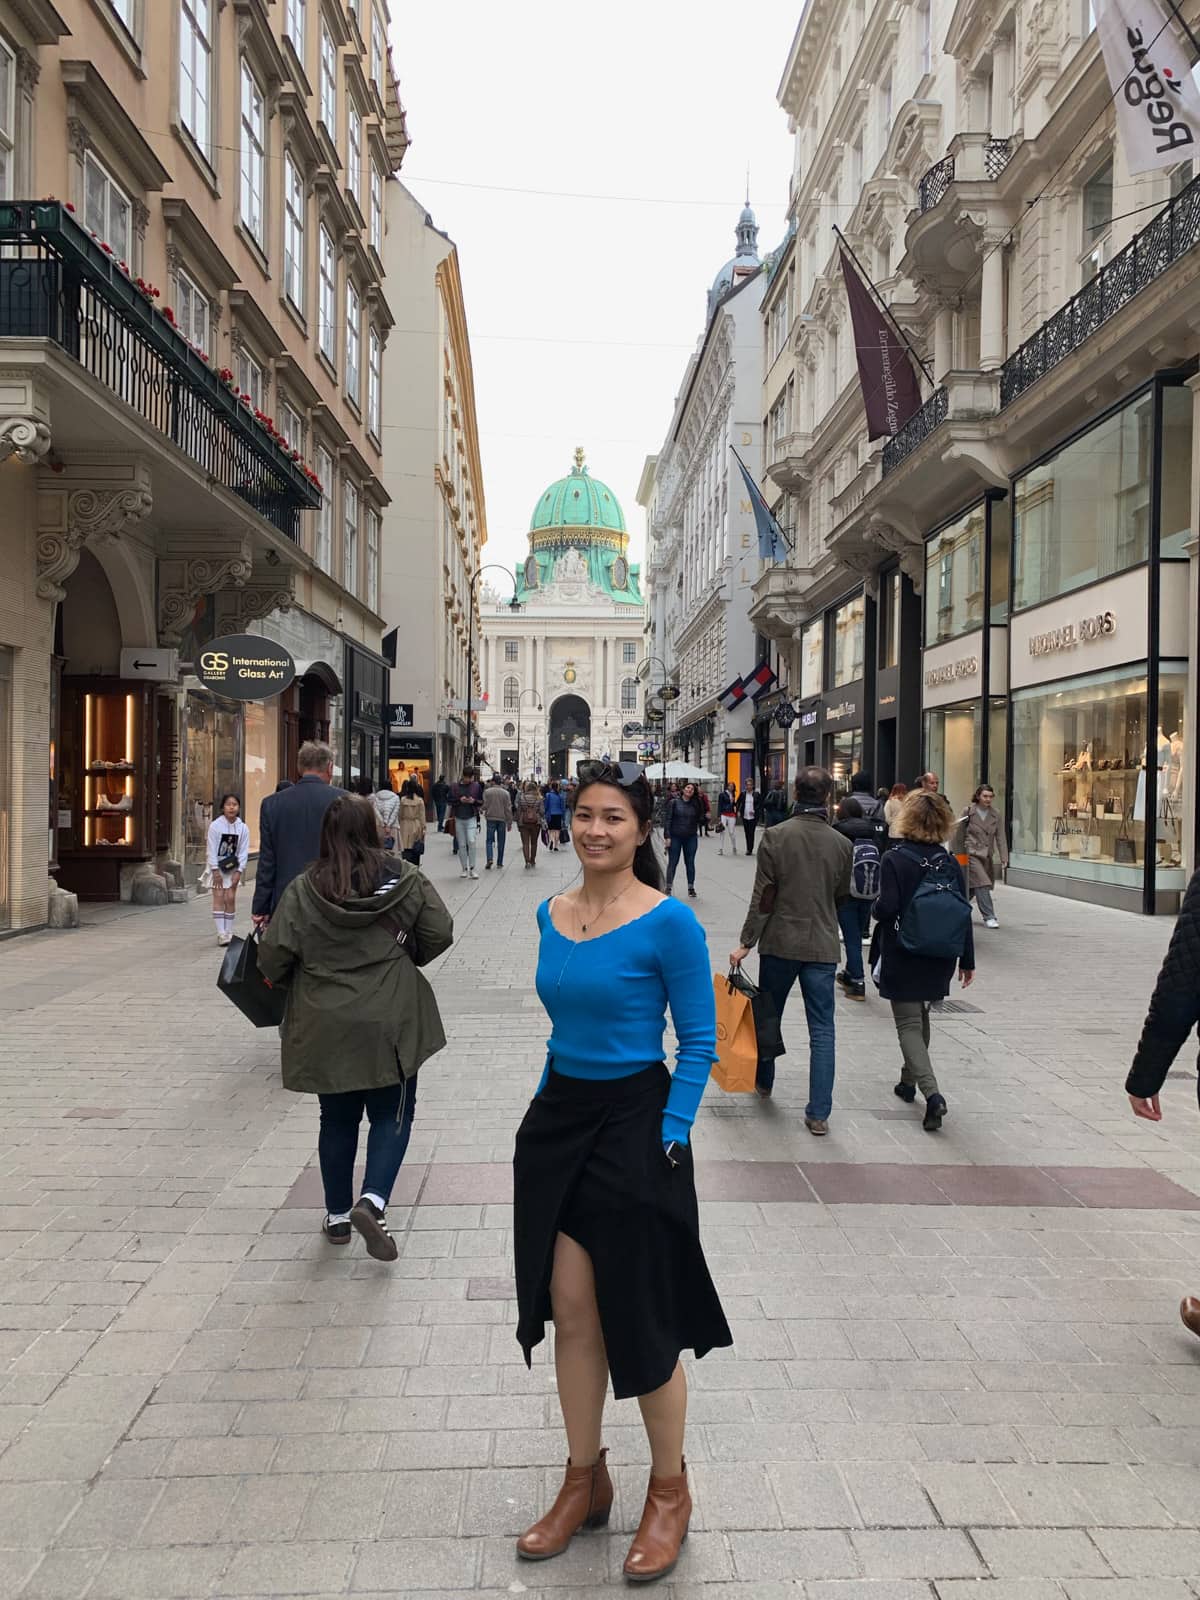 A woman wearing a blue long sleeved top and a long black skirt. She has her hands in her pockets. She’s standing in a pedestrianised open street mall and in the background is an old building with a green dome-shaped top